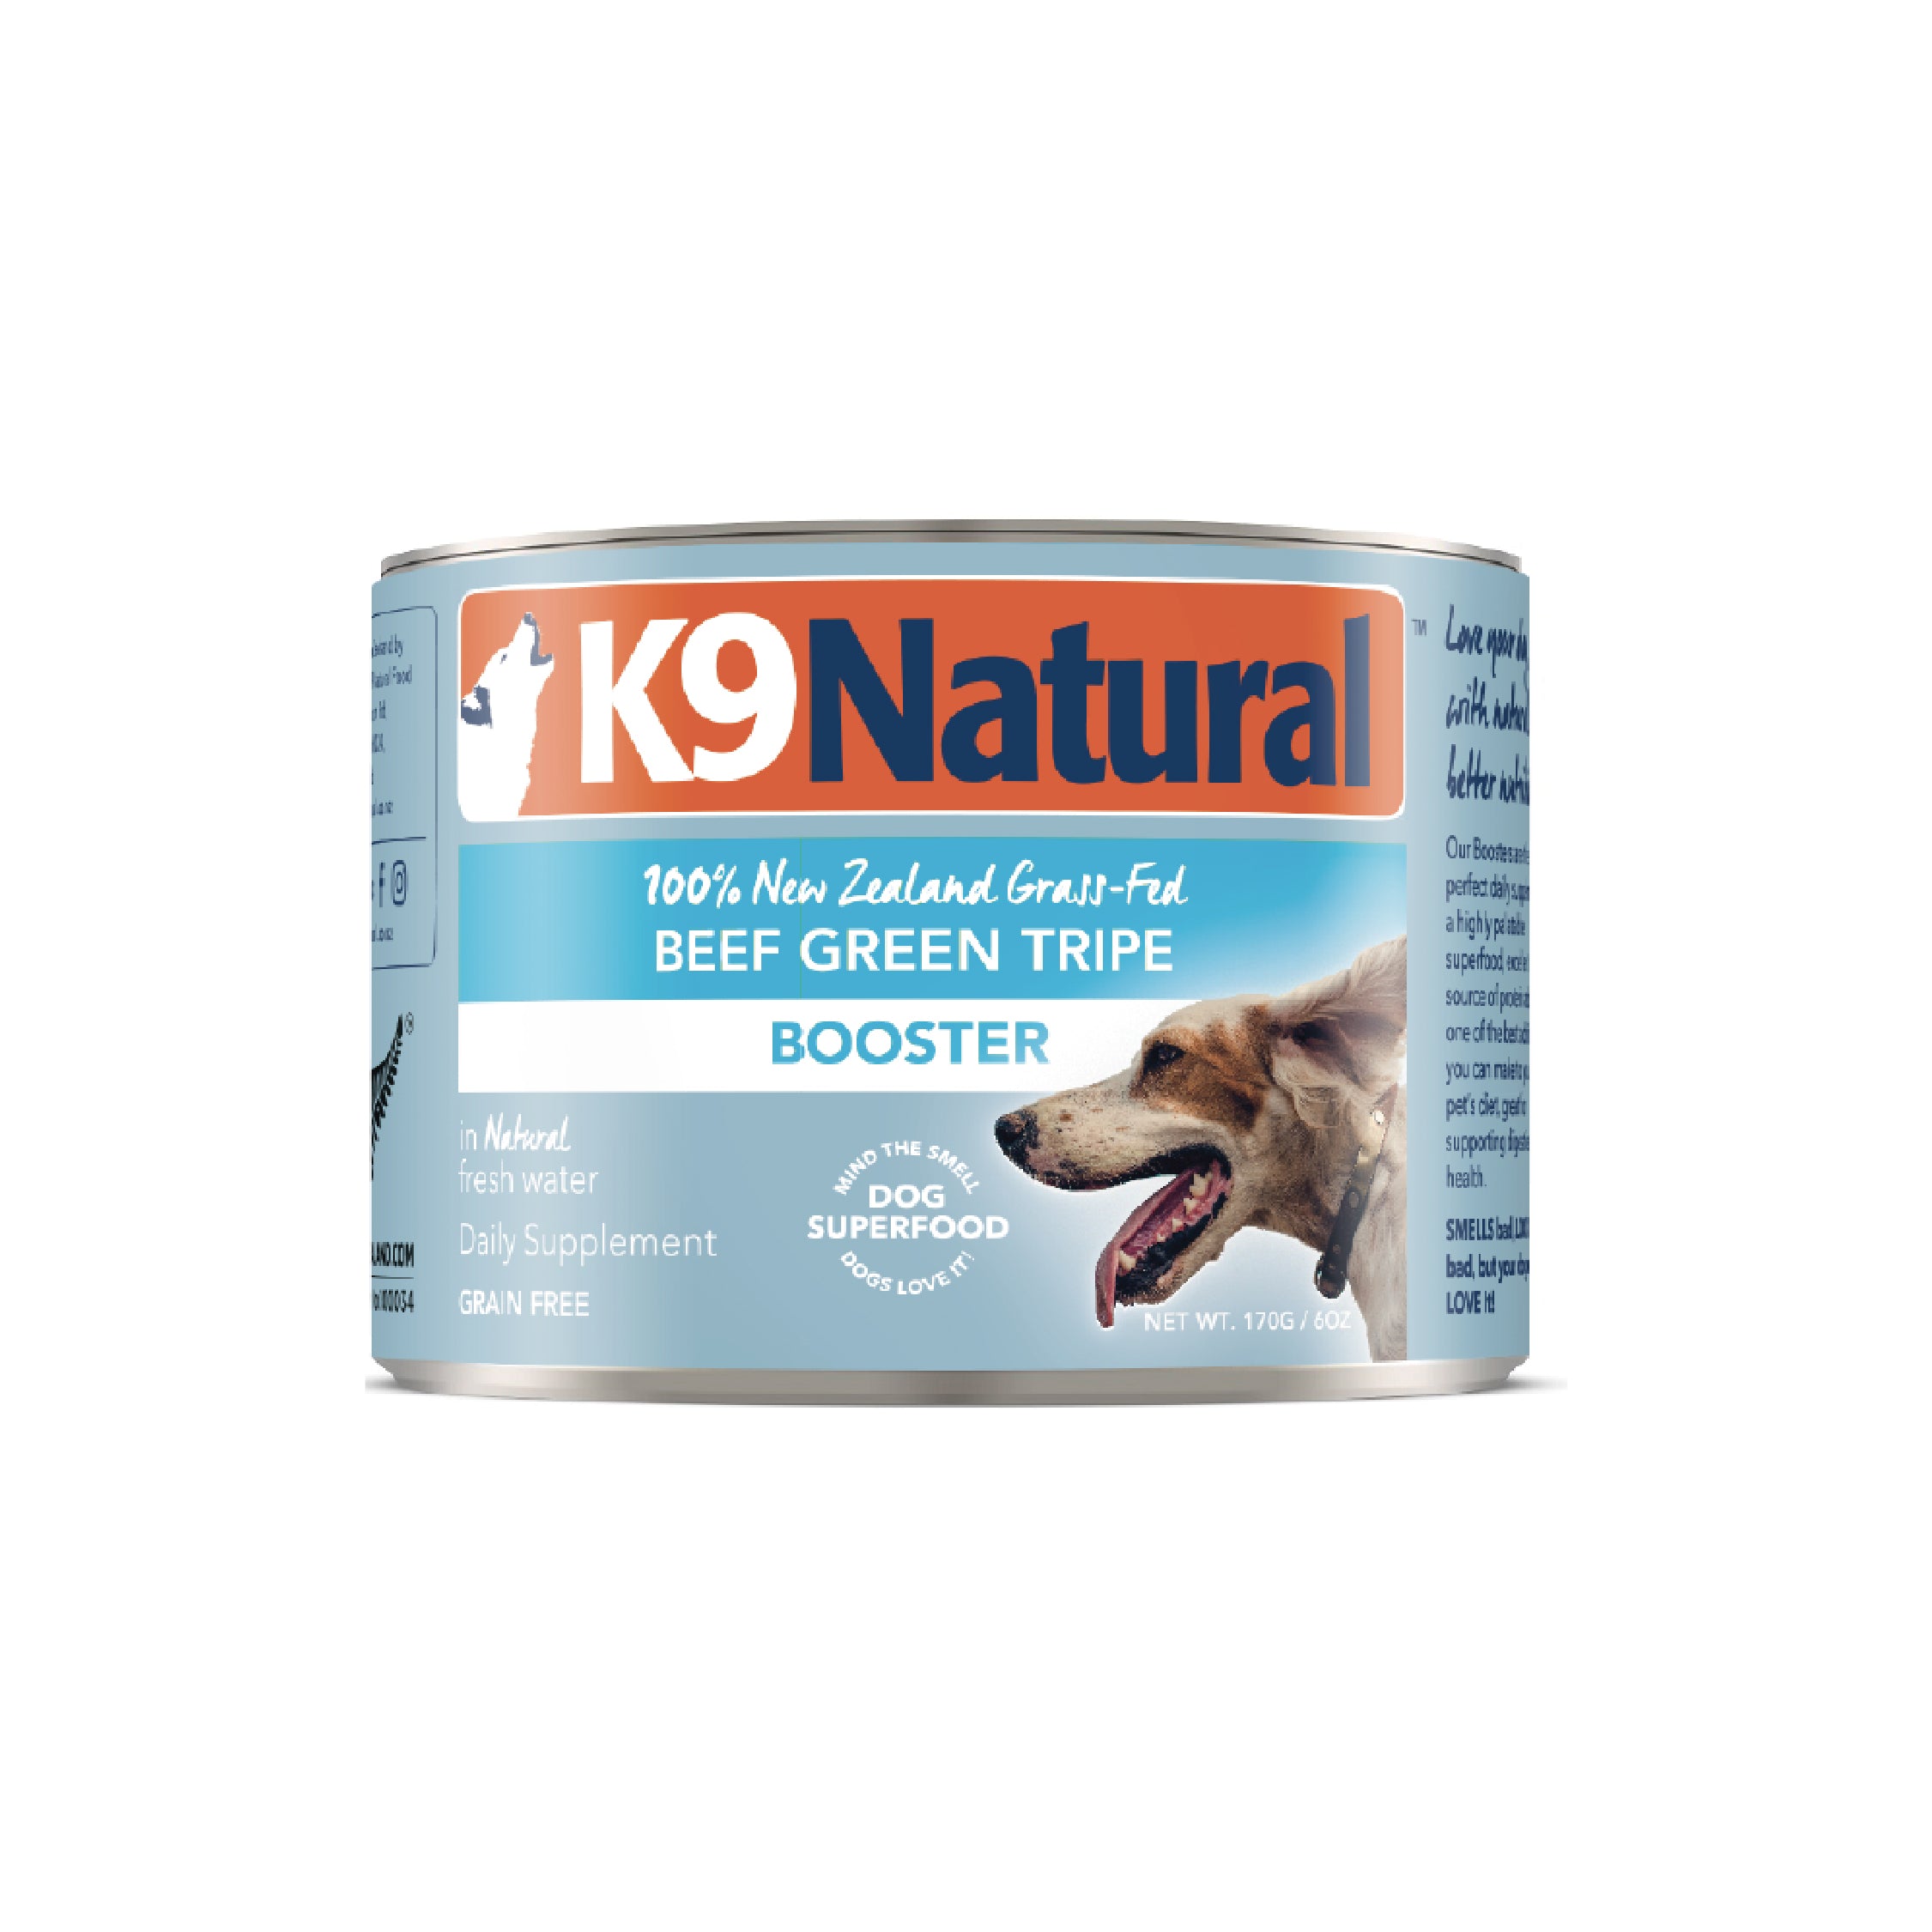 K9 Natural Beef Green Tripe Booster Grain-Free Canned Dog Food